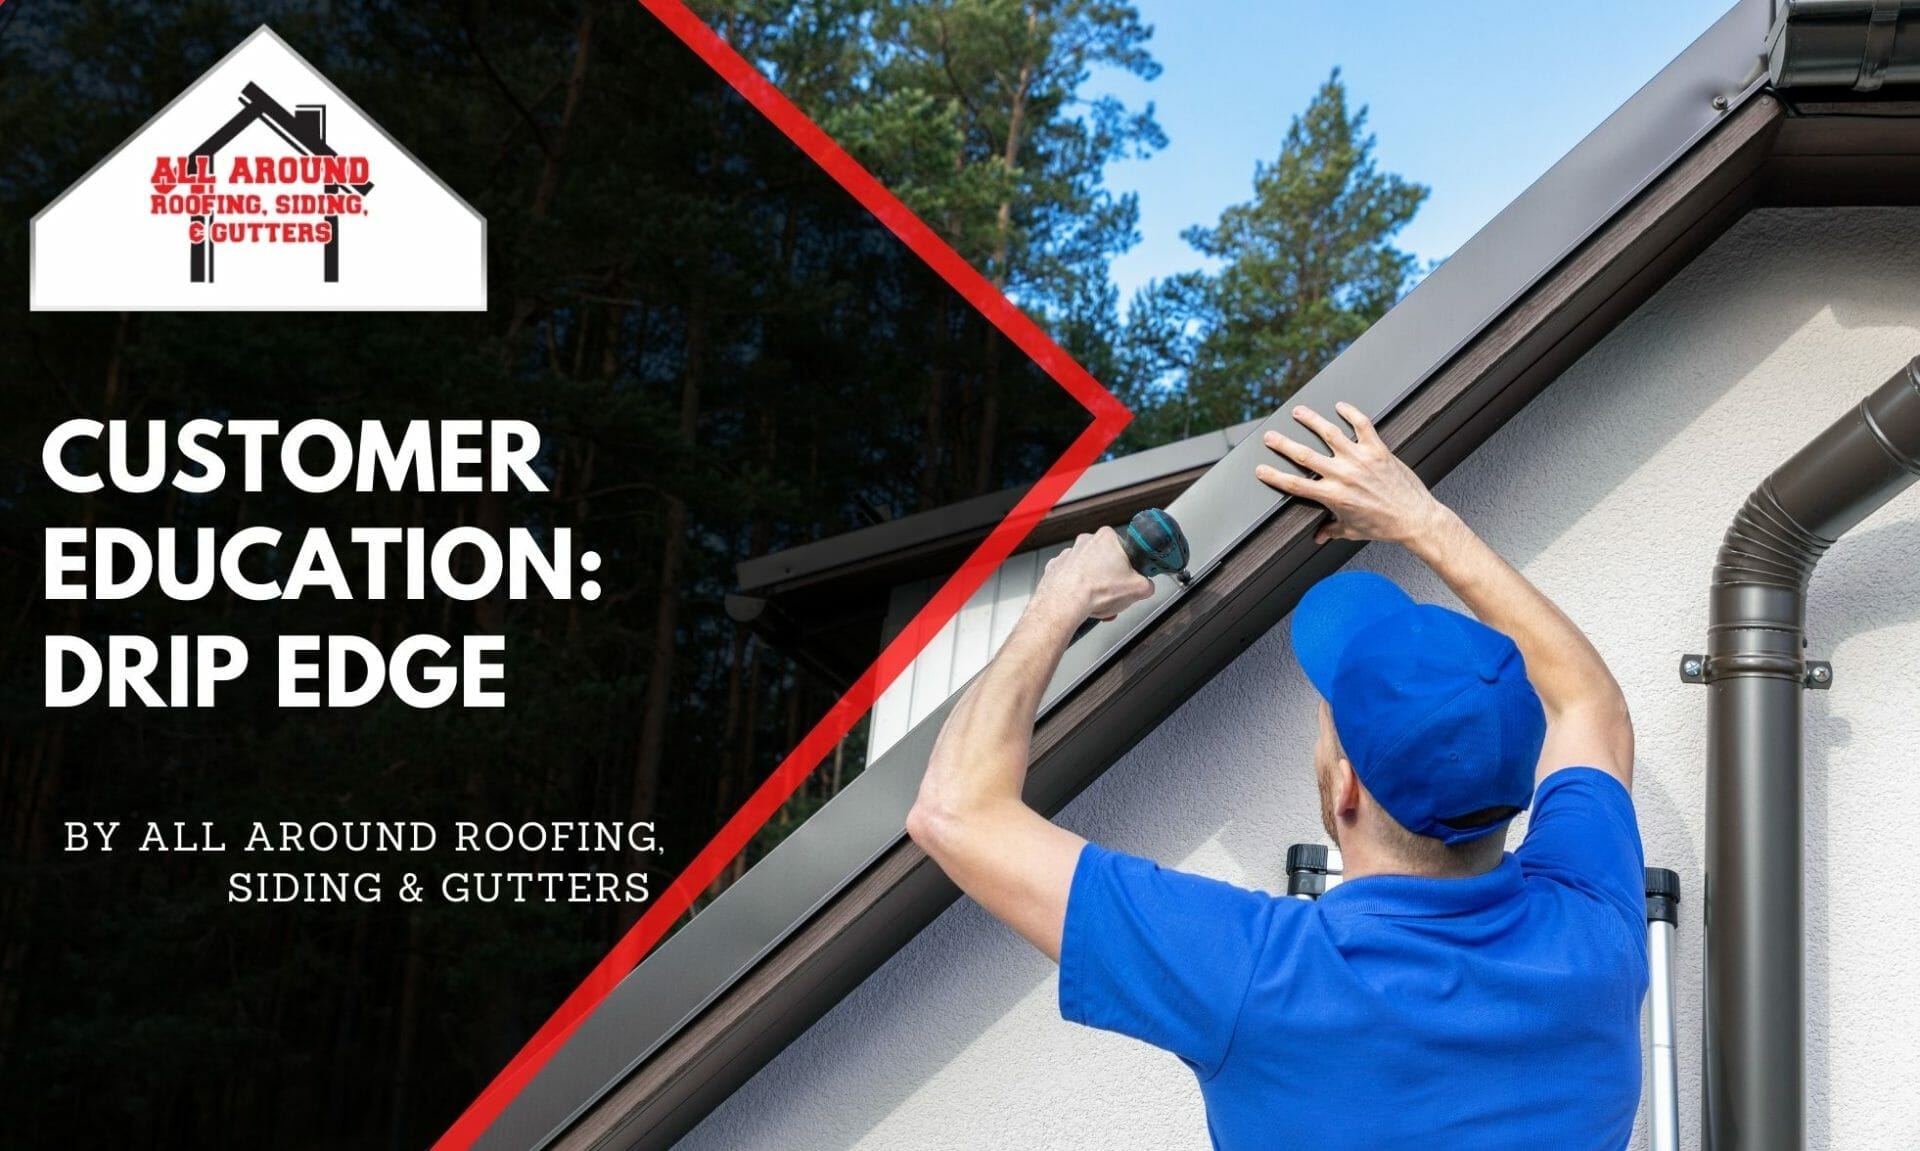 CUSTOMER EDUCATION: DRIP EDGE DETAIL - All Around Roofing, Siding & Gutters